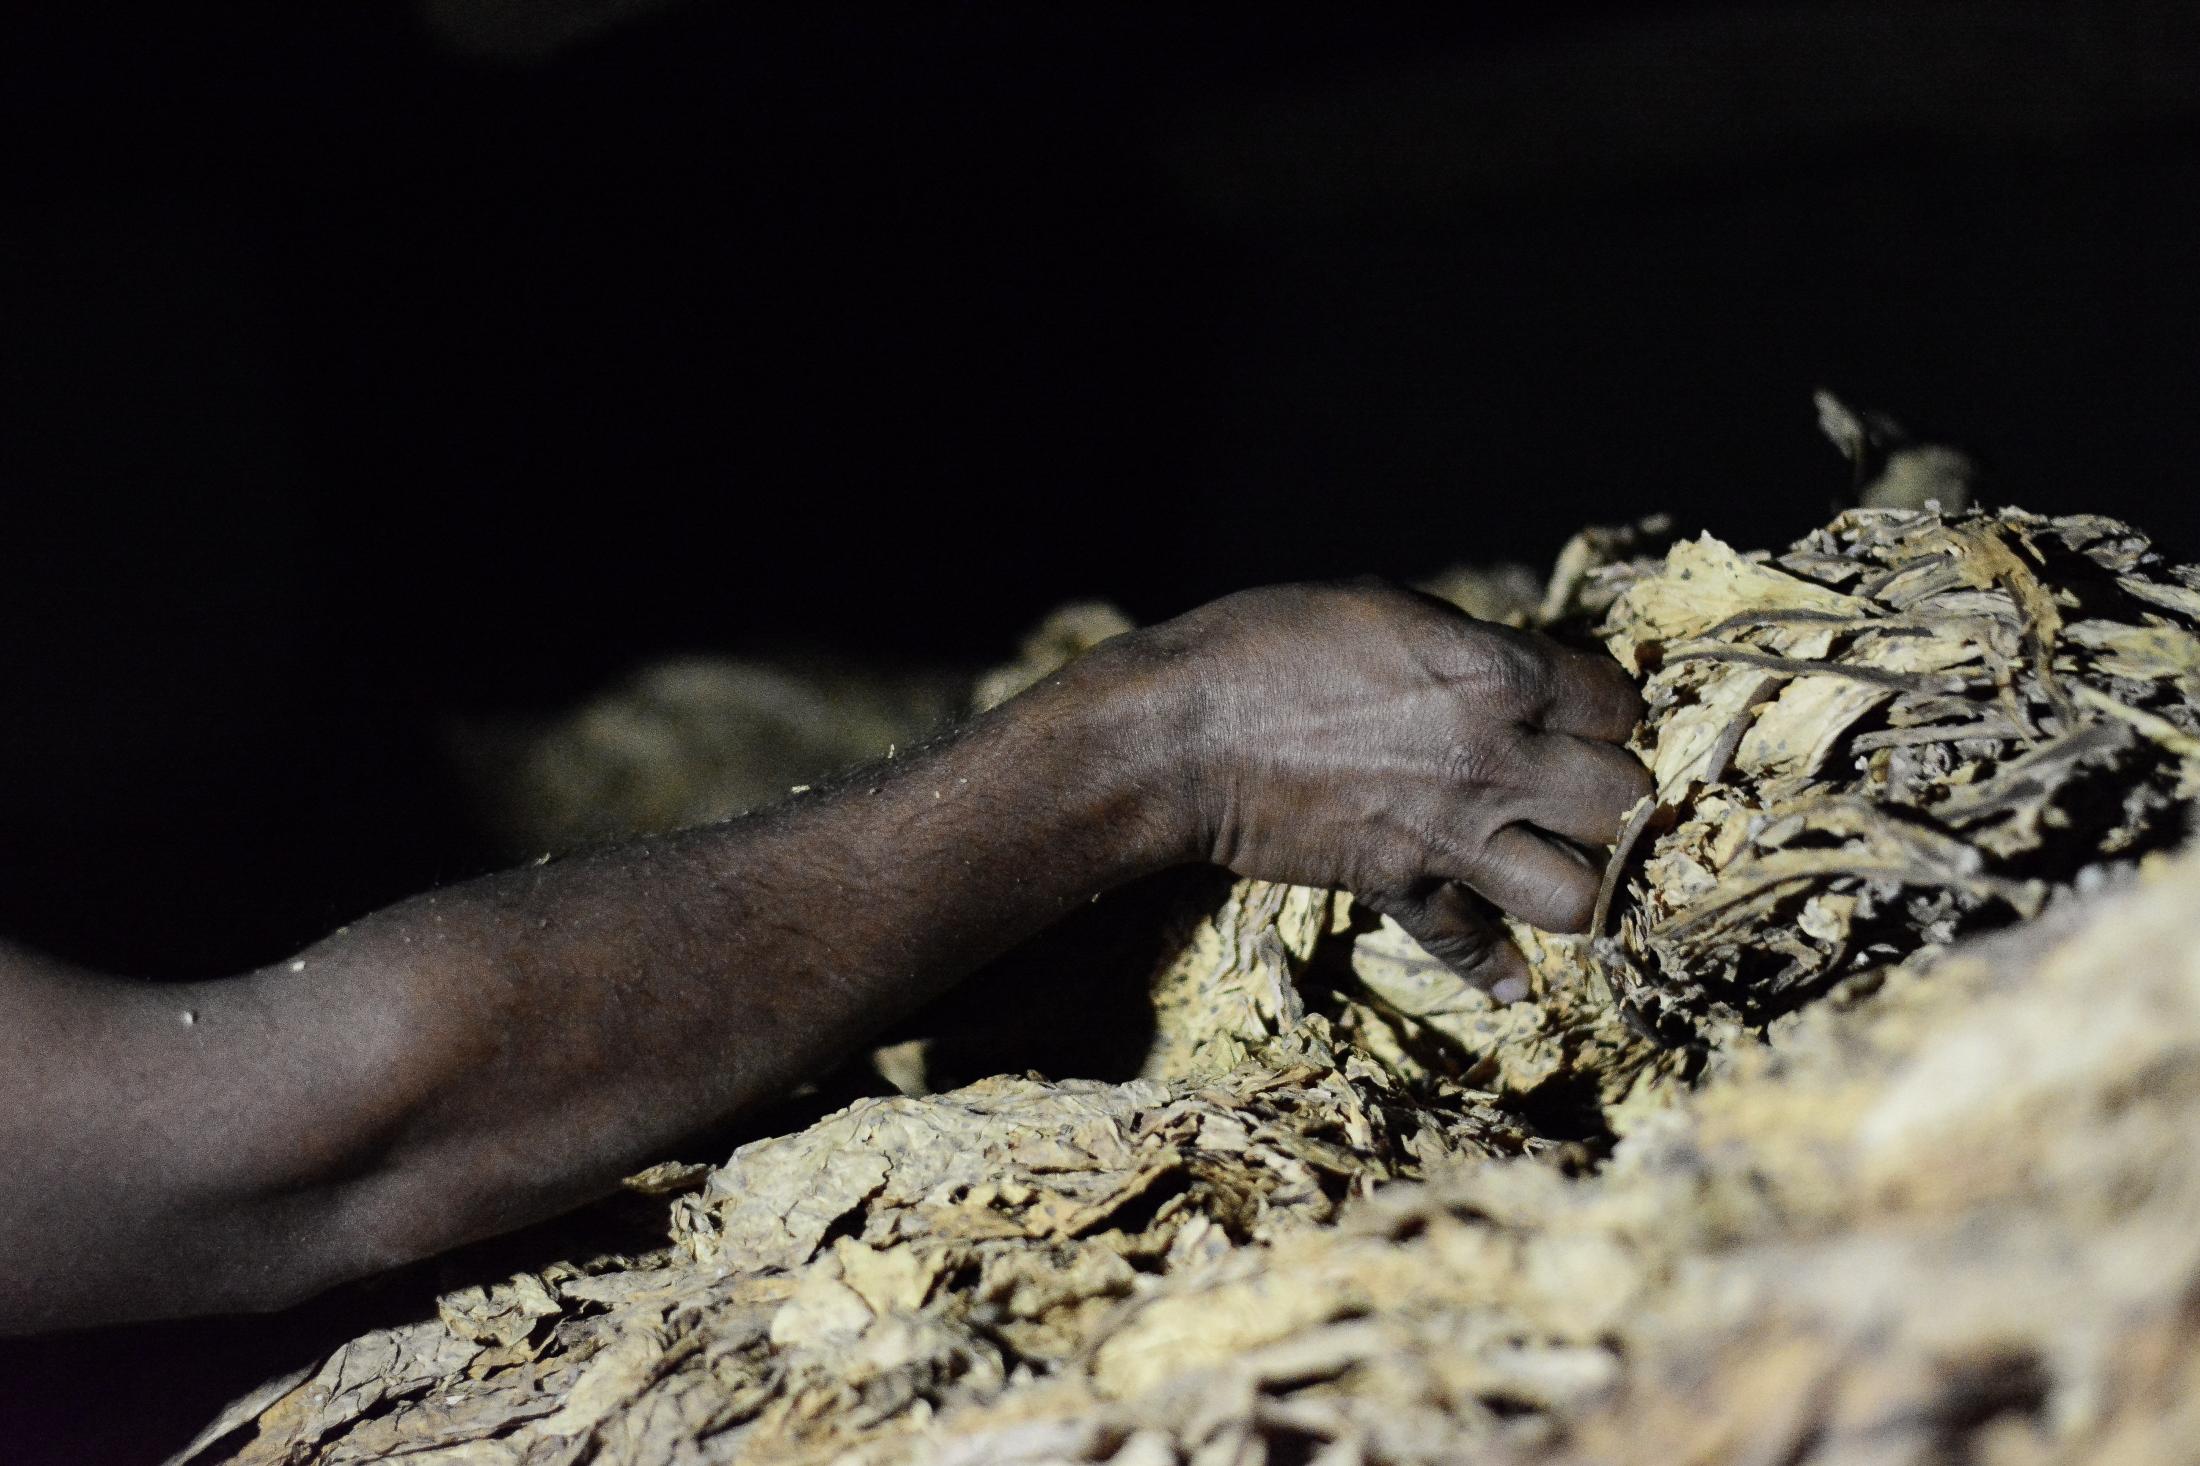 Puttaswamy continues to grow tobacco and has five varieties. Each variety is a different grade and is priced accordingly.